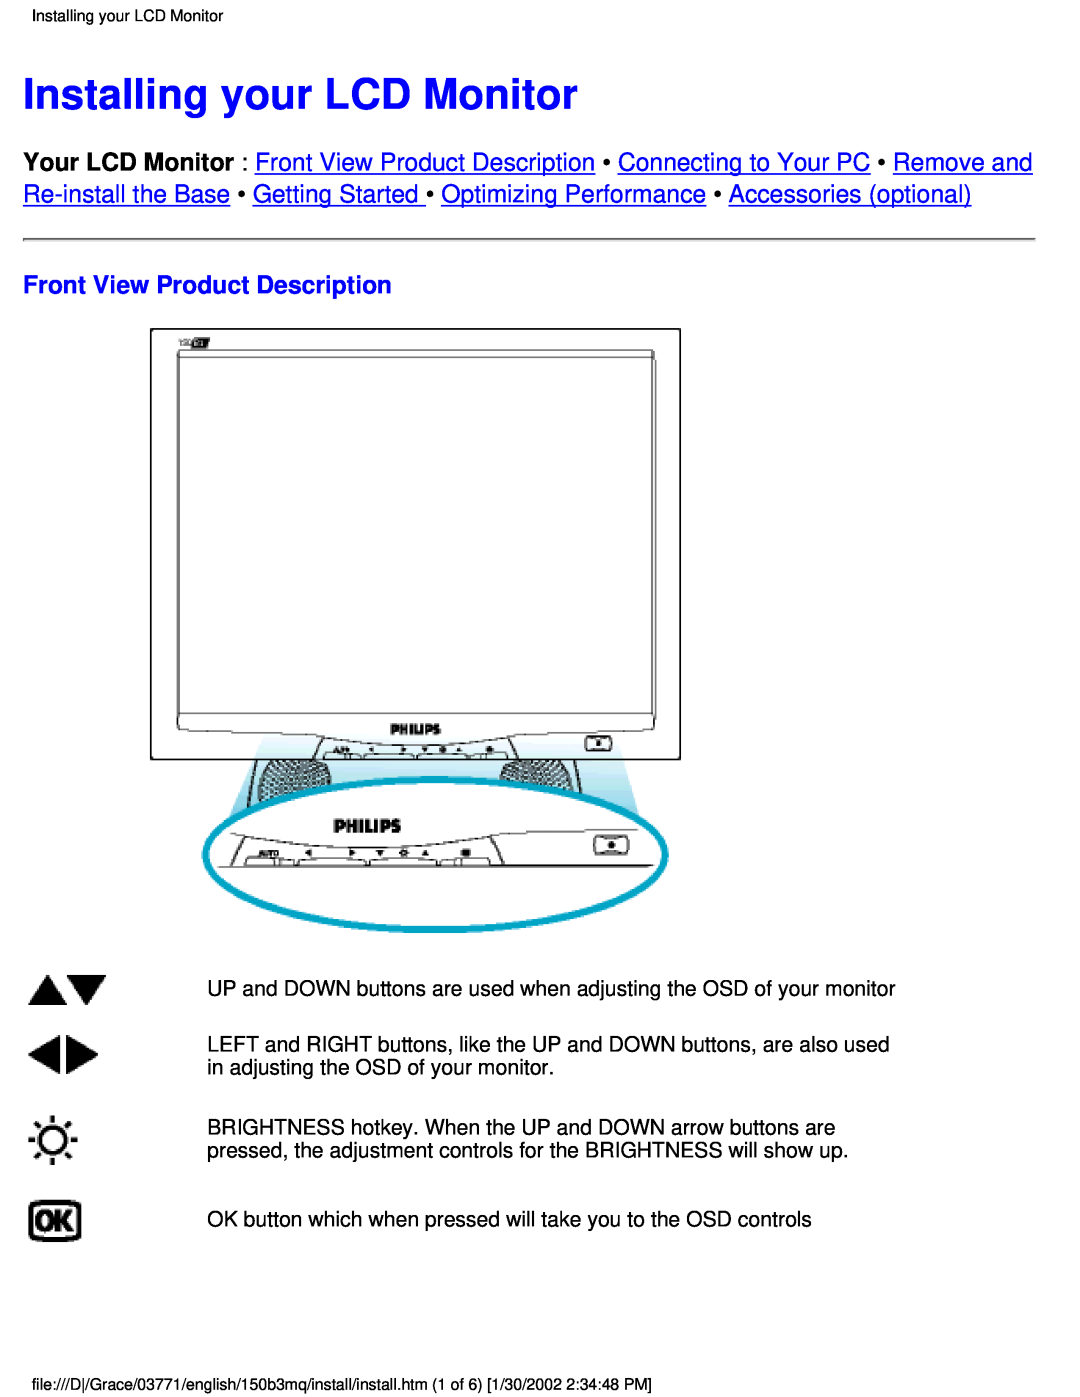 Philips 150B3M/150B3Q user manual Installing your LCD Monitor, Front View Product Description 